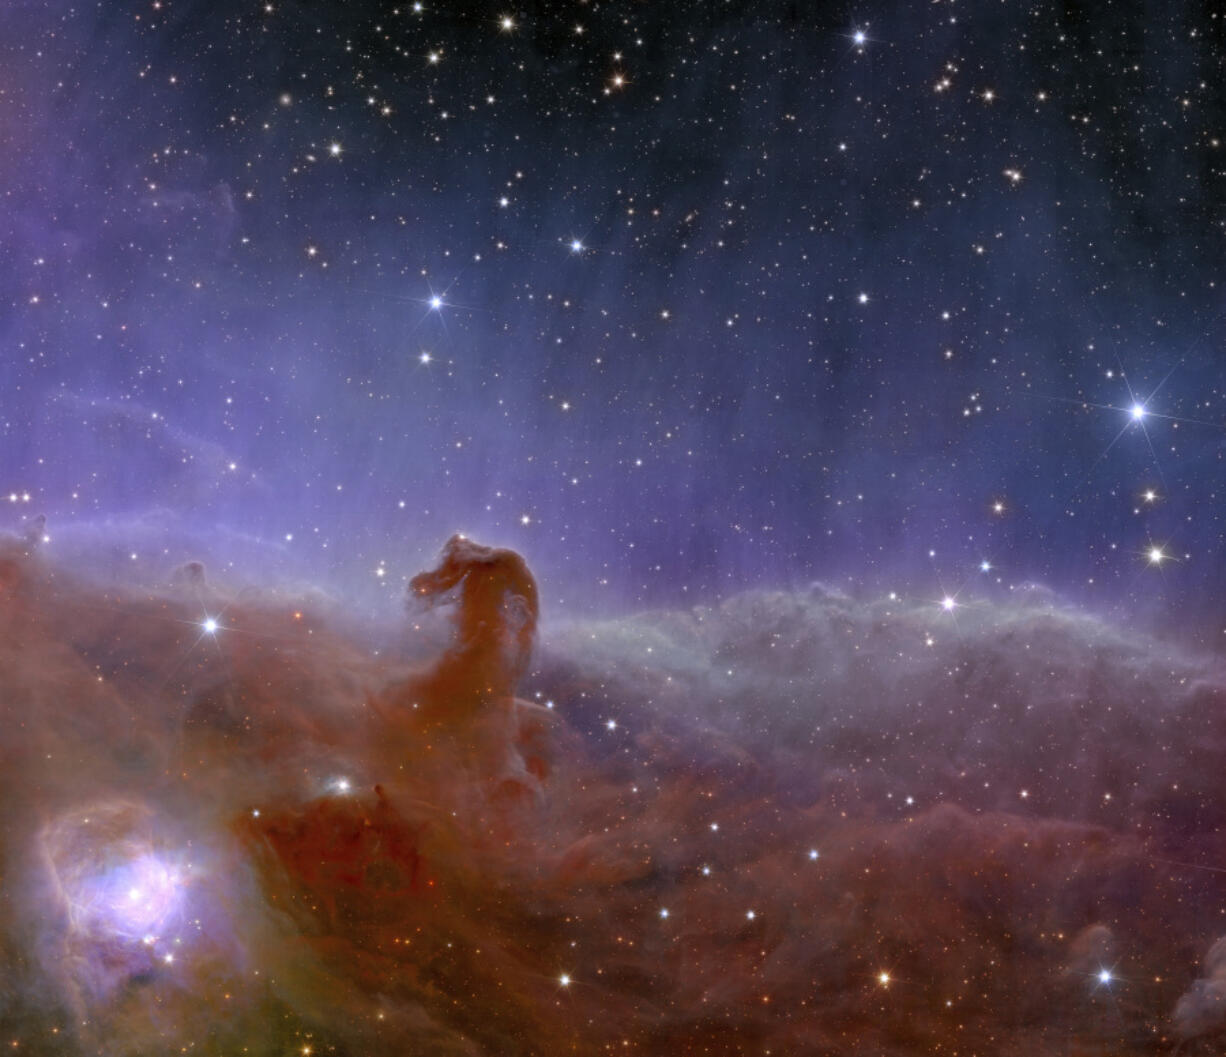 This image provided by the European Space Agency shows Euclid&rsquo;s panoramic view of the Horsehead Nebula. The European Space Agency released Euclid&rsquo;s first photos Tuesday, Nov. 7, 2023 four months after the spacecraft was launched from Florida to study the dark universe, invisible yet everywhere. Euclid will observe billions of galaxies, creating the largest 3D map ever made of the cosmos, in order to better understand the dark energy and matter that make up 95 percent of the universe.